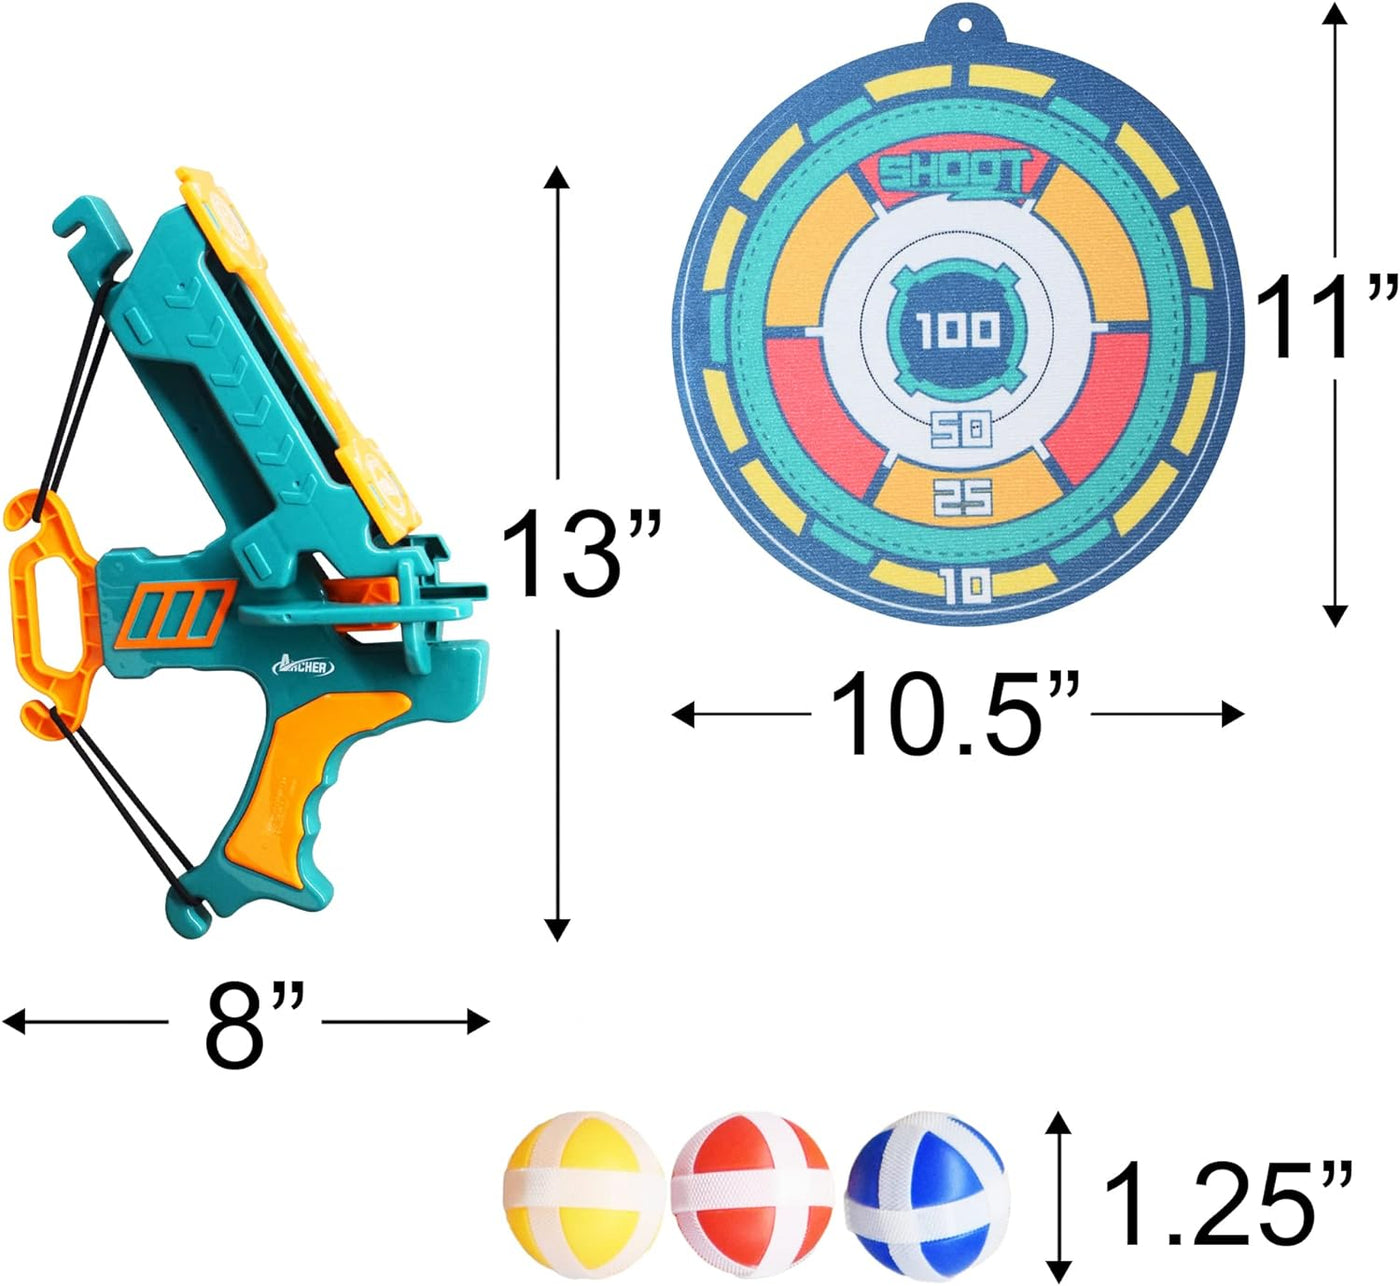 Bow and Arrow for Kids 8,9,10,11,12,13,14, Kids Darts Board Set, Velcro Dart Board with Balls for Kids - Outdoor and Indoor Sports Games for Kids, Christmas, Birthday Gift in Colorful Gift Box